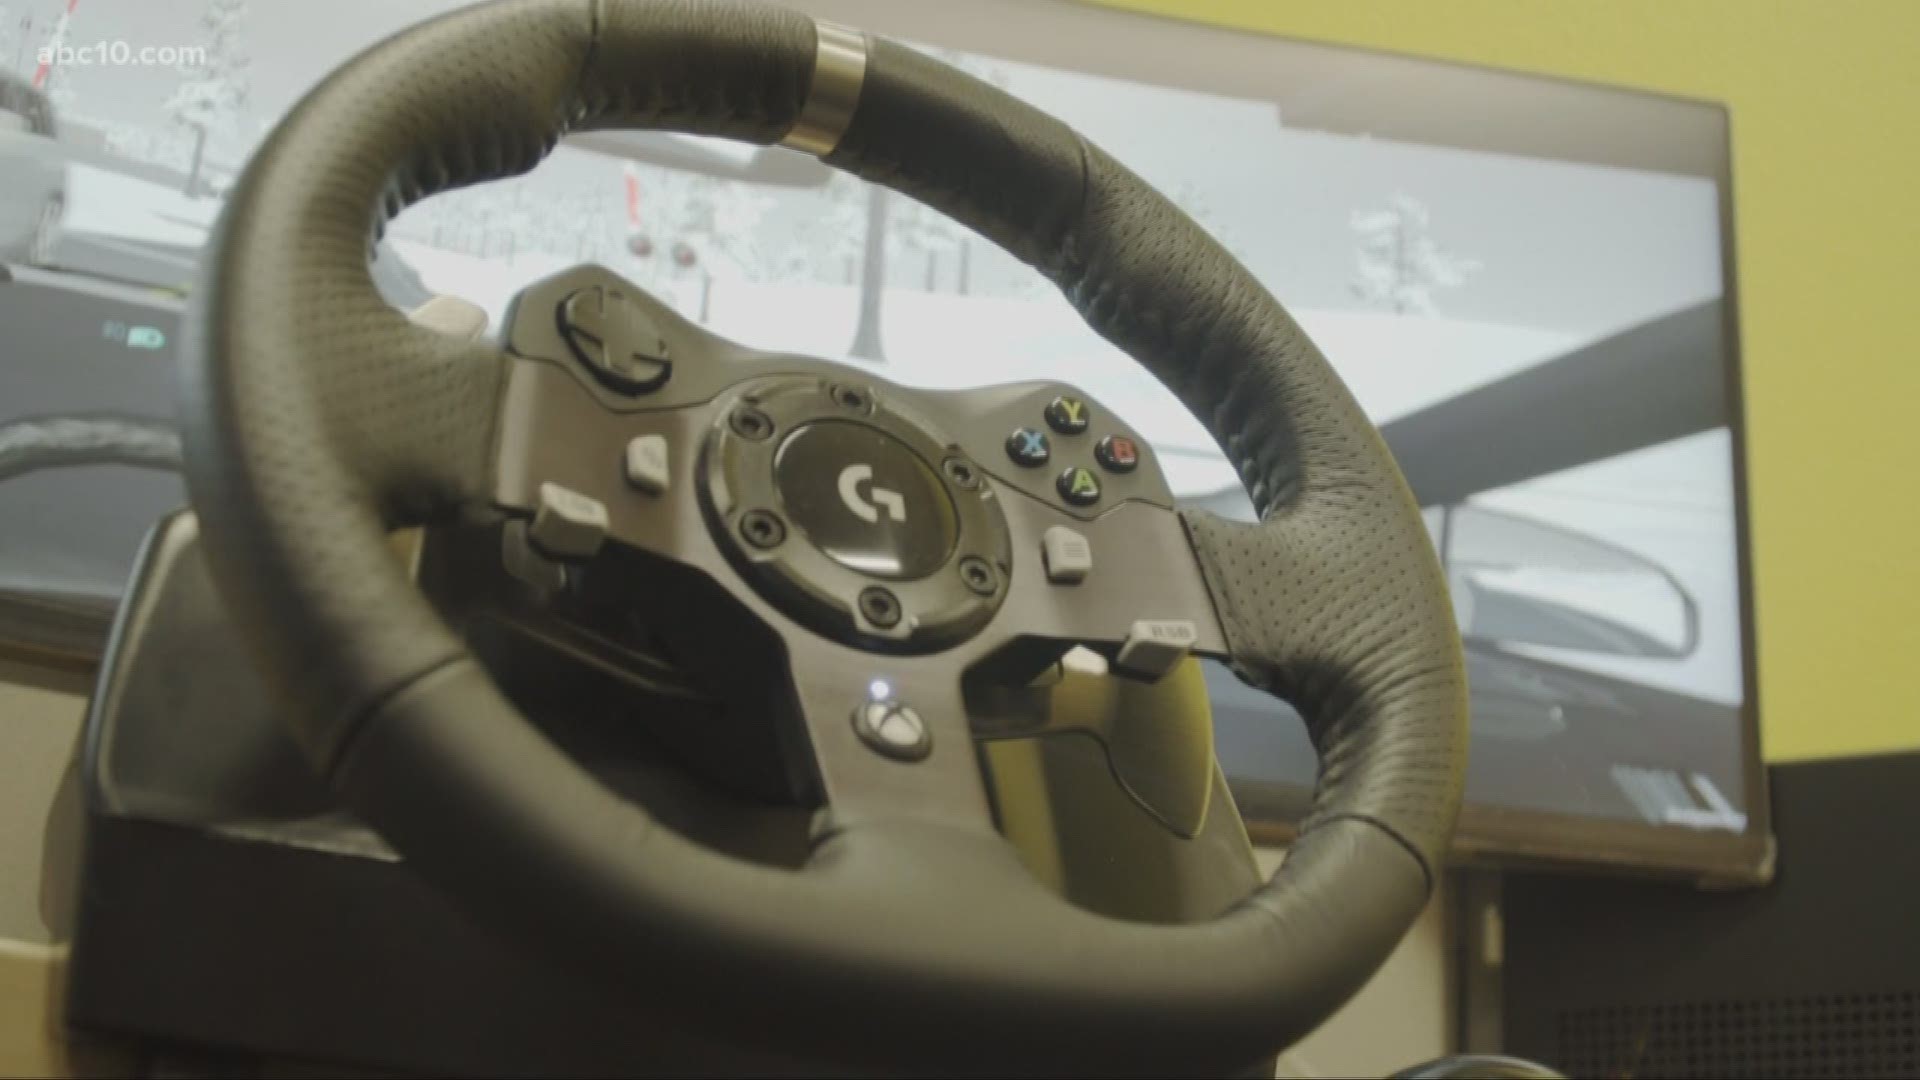 A local El Dorado Hills company has developed an Xbox game that helps teens learn the basics of safe driving and also helps them deal with dangerous and distracting situations that they can experience on the road.